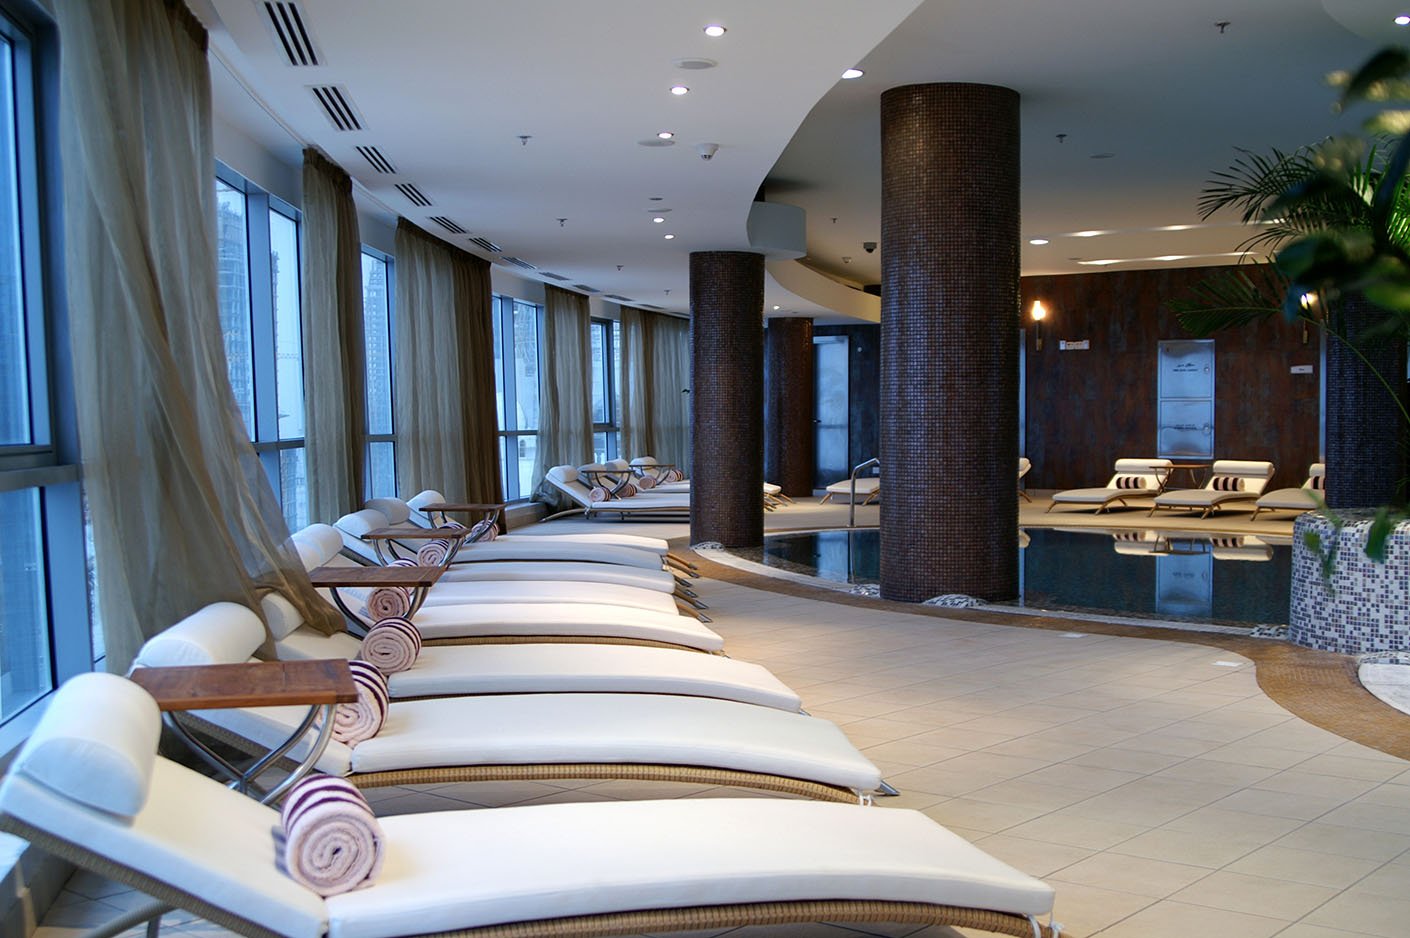 Wellness Spa: a growing hospitality niche in a post-COVID landscape